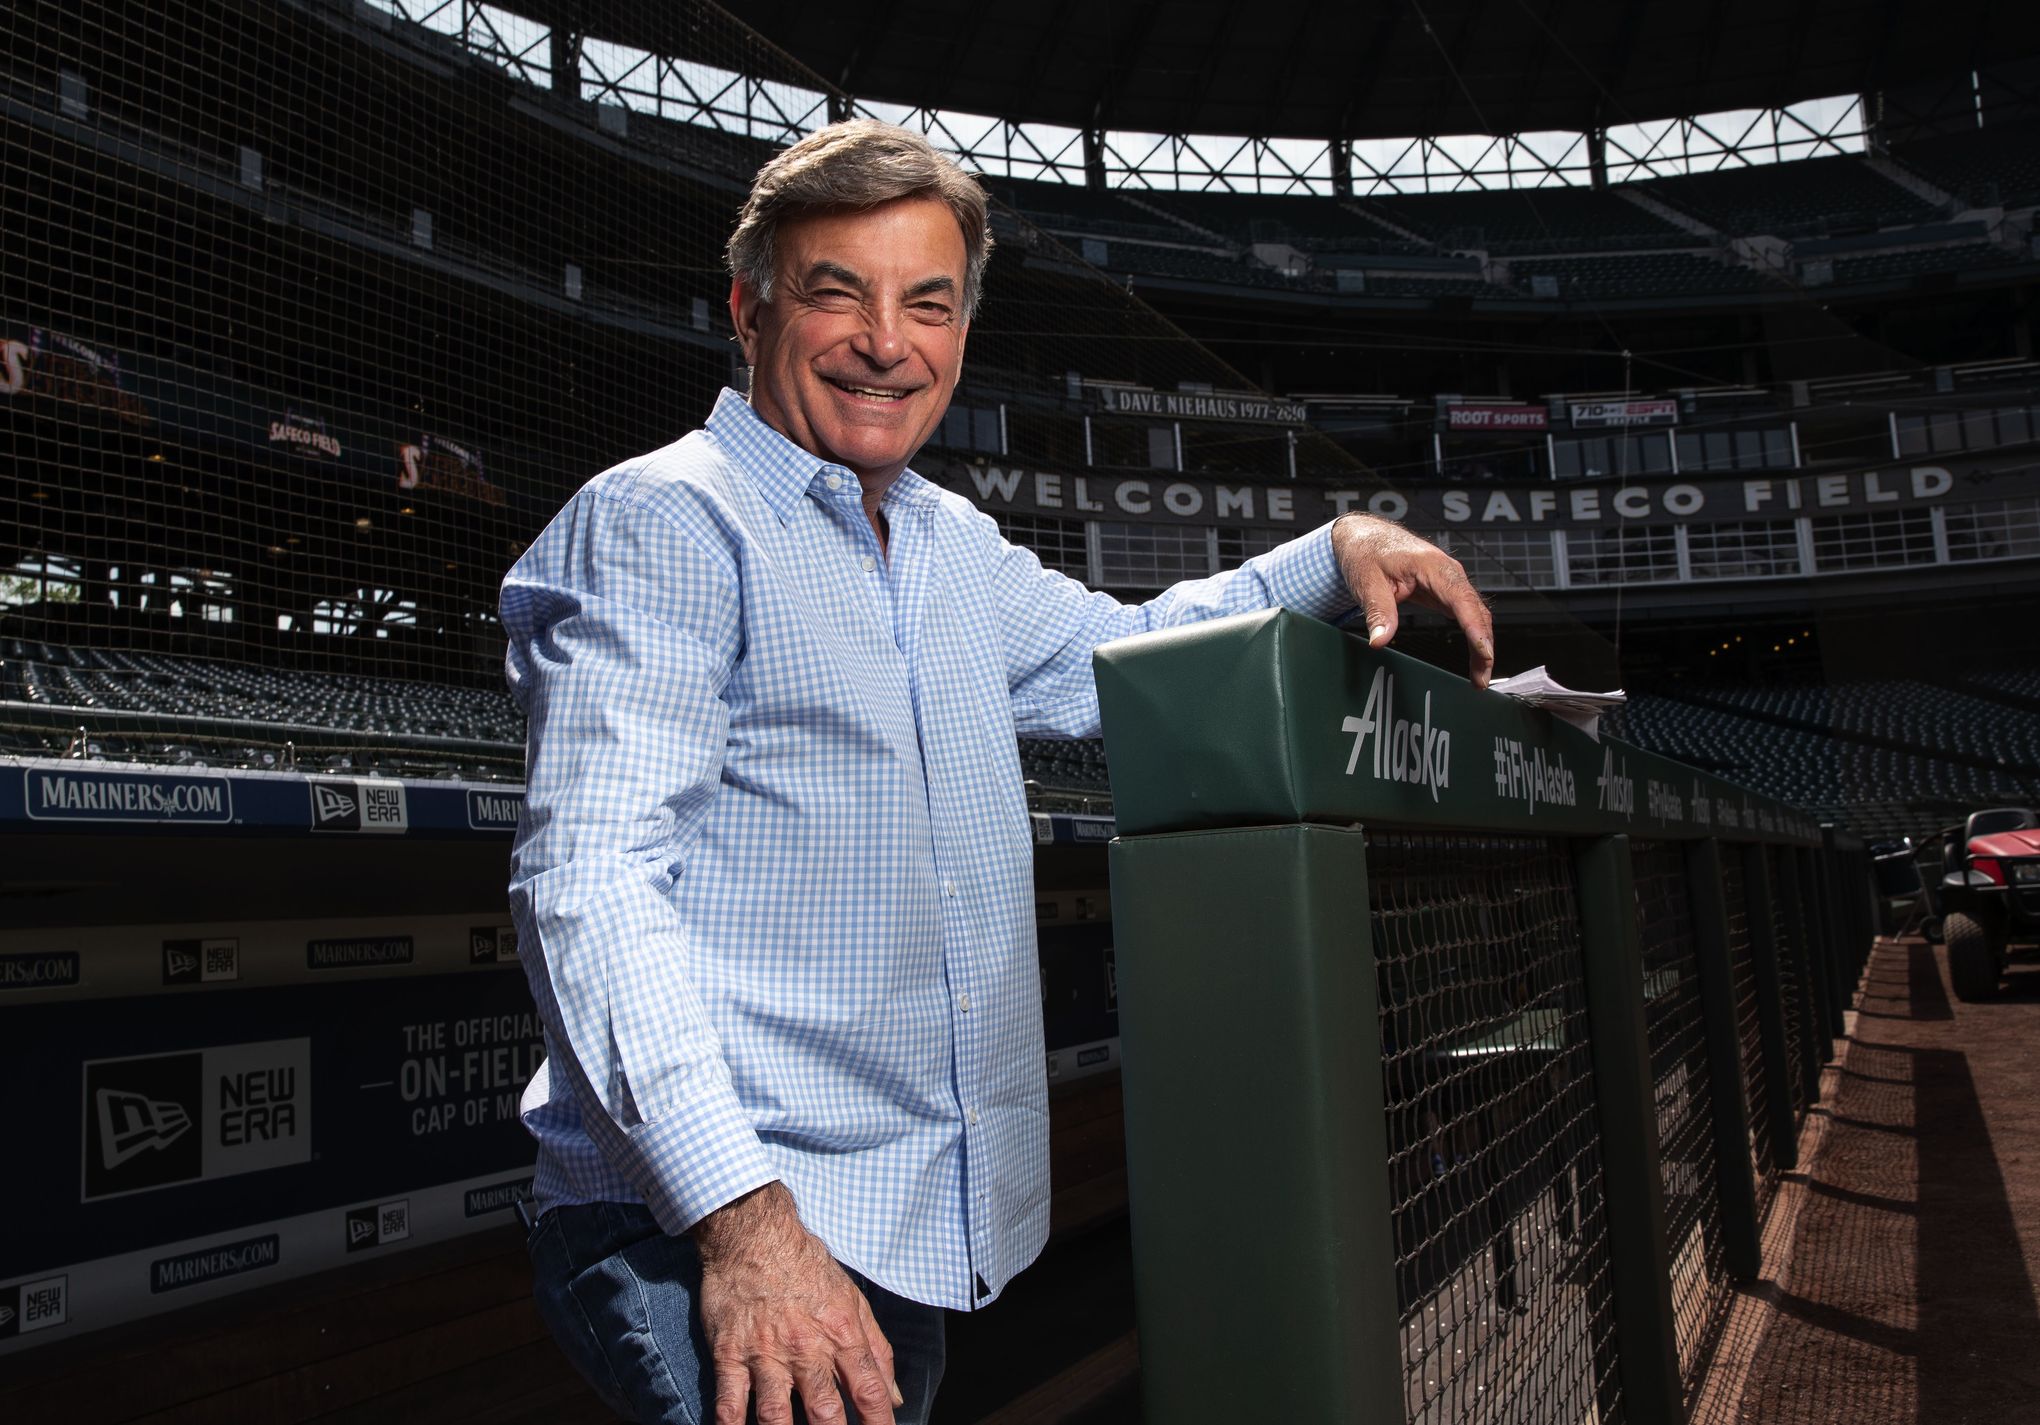 Mariners announcer Rick Rizzs is living his dream and it shows